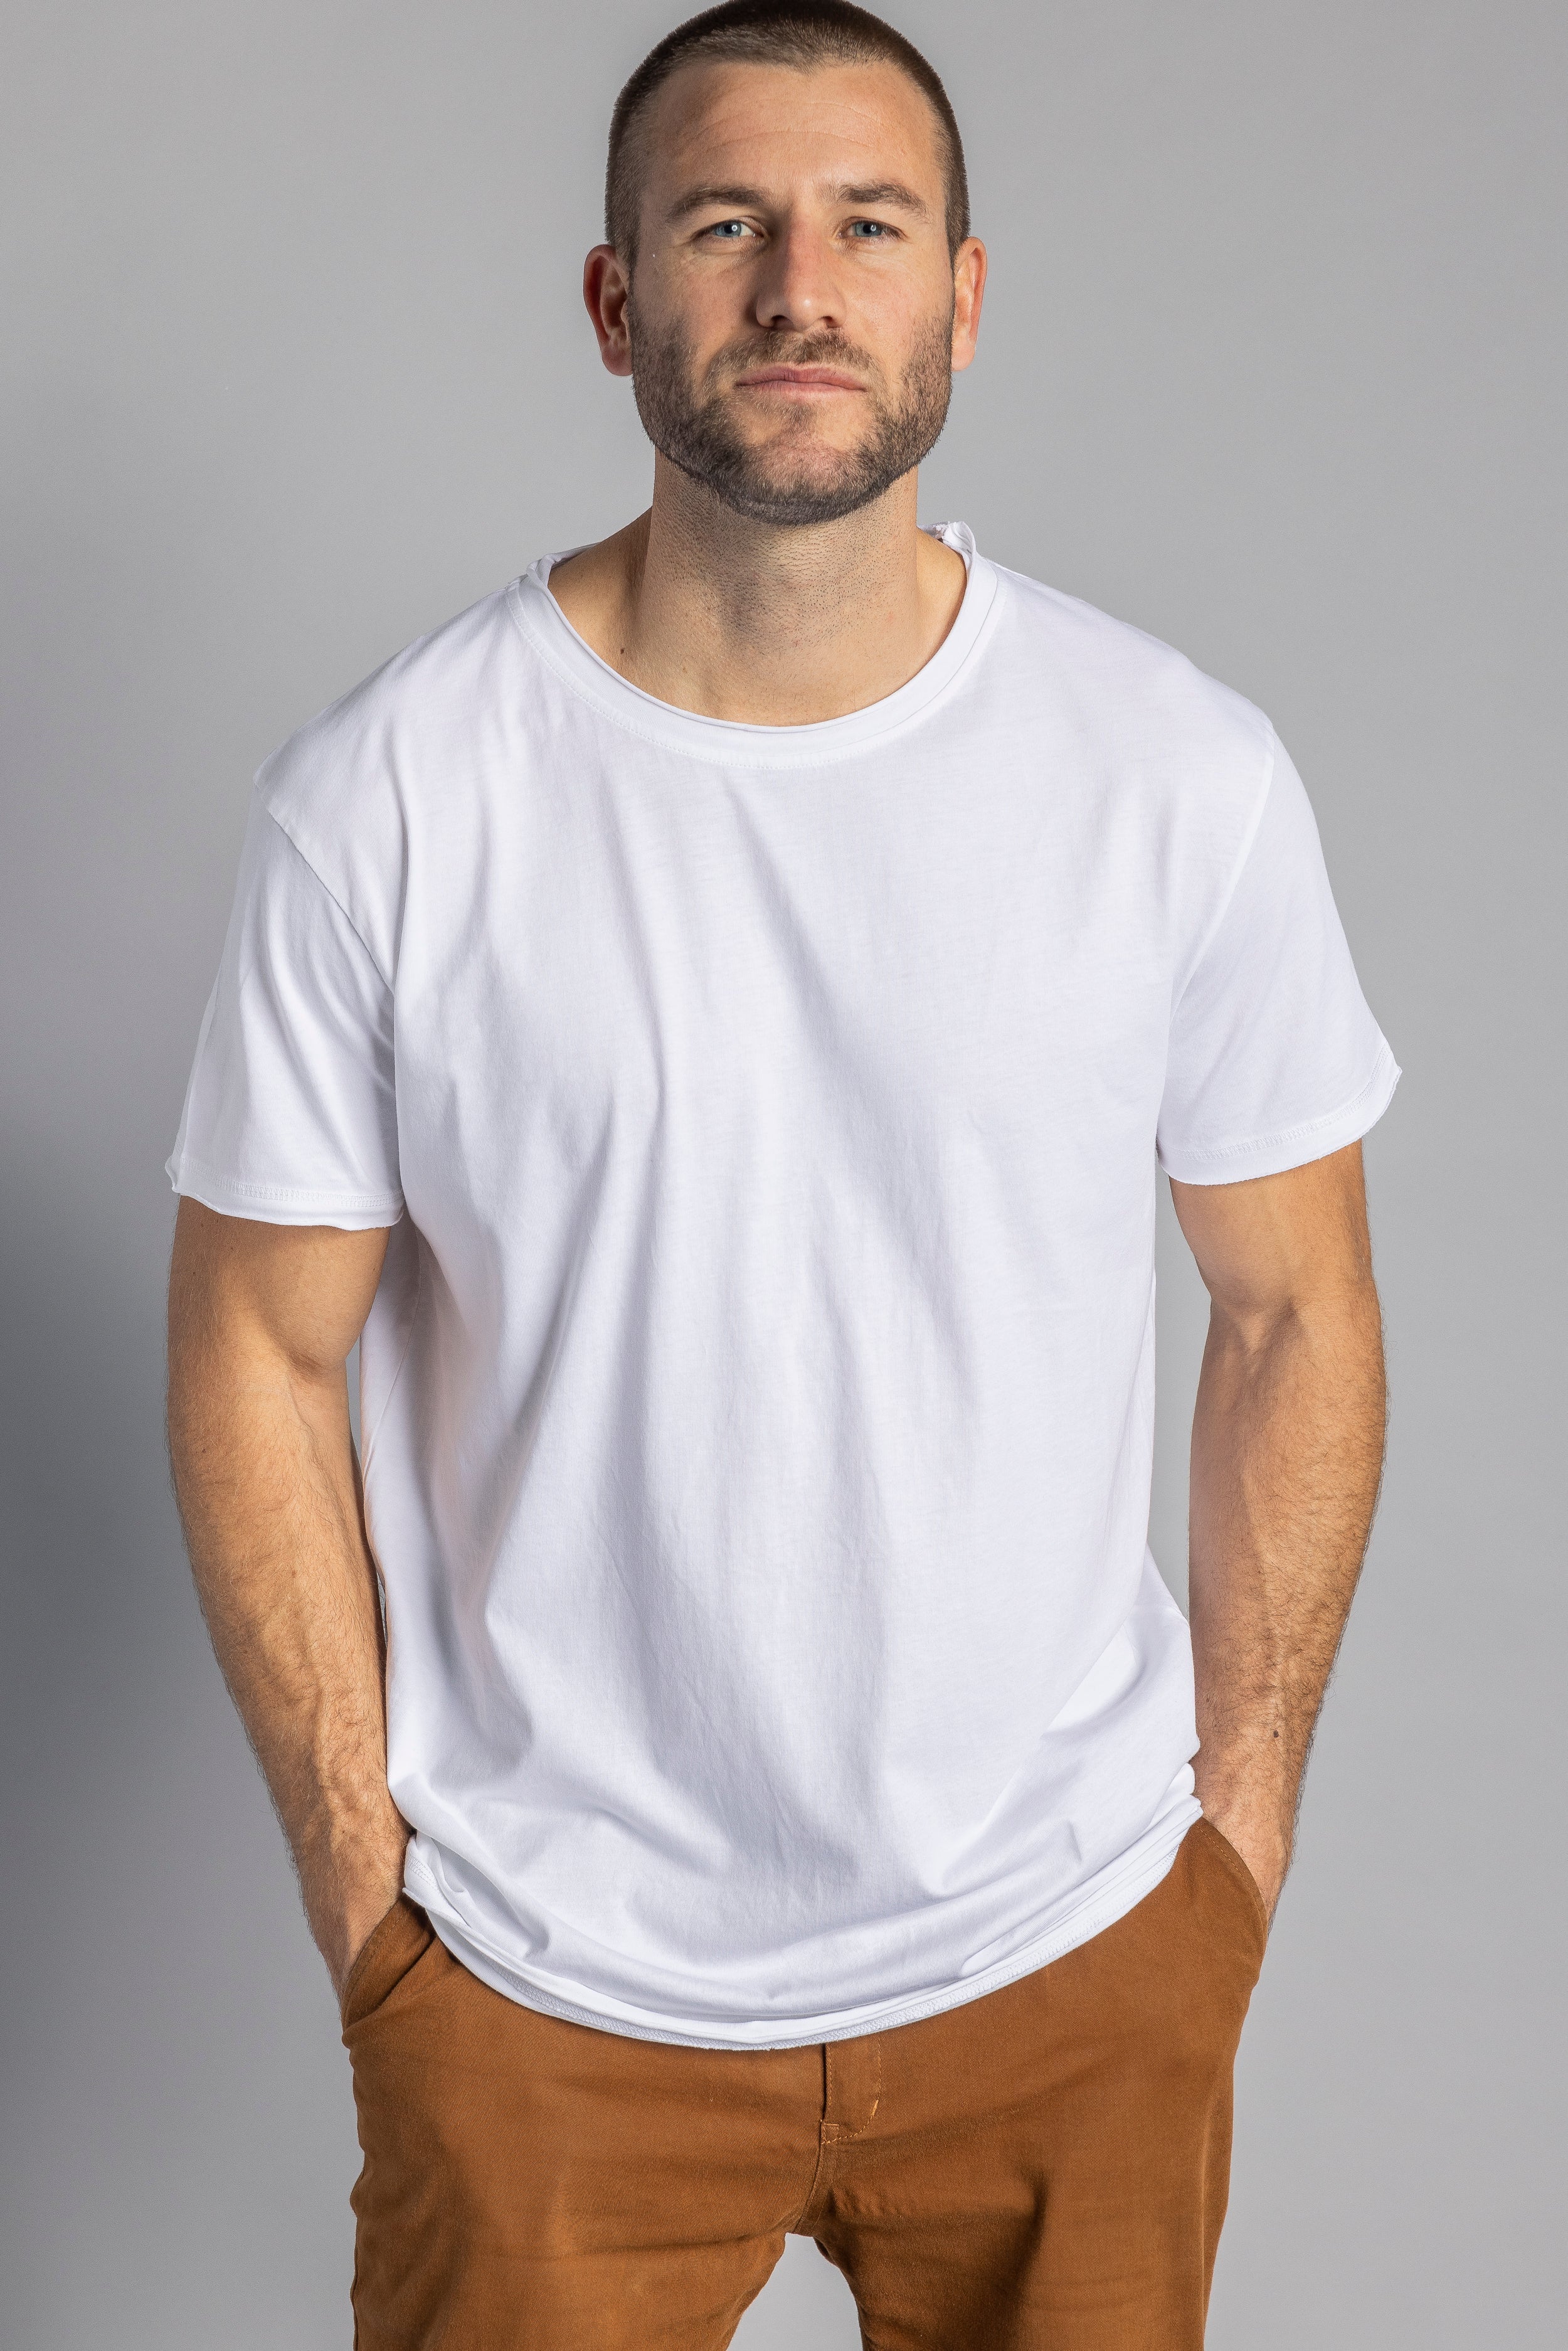 White vintage T-shirt made from 100% organic cotton from DIRTS